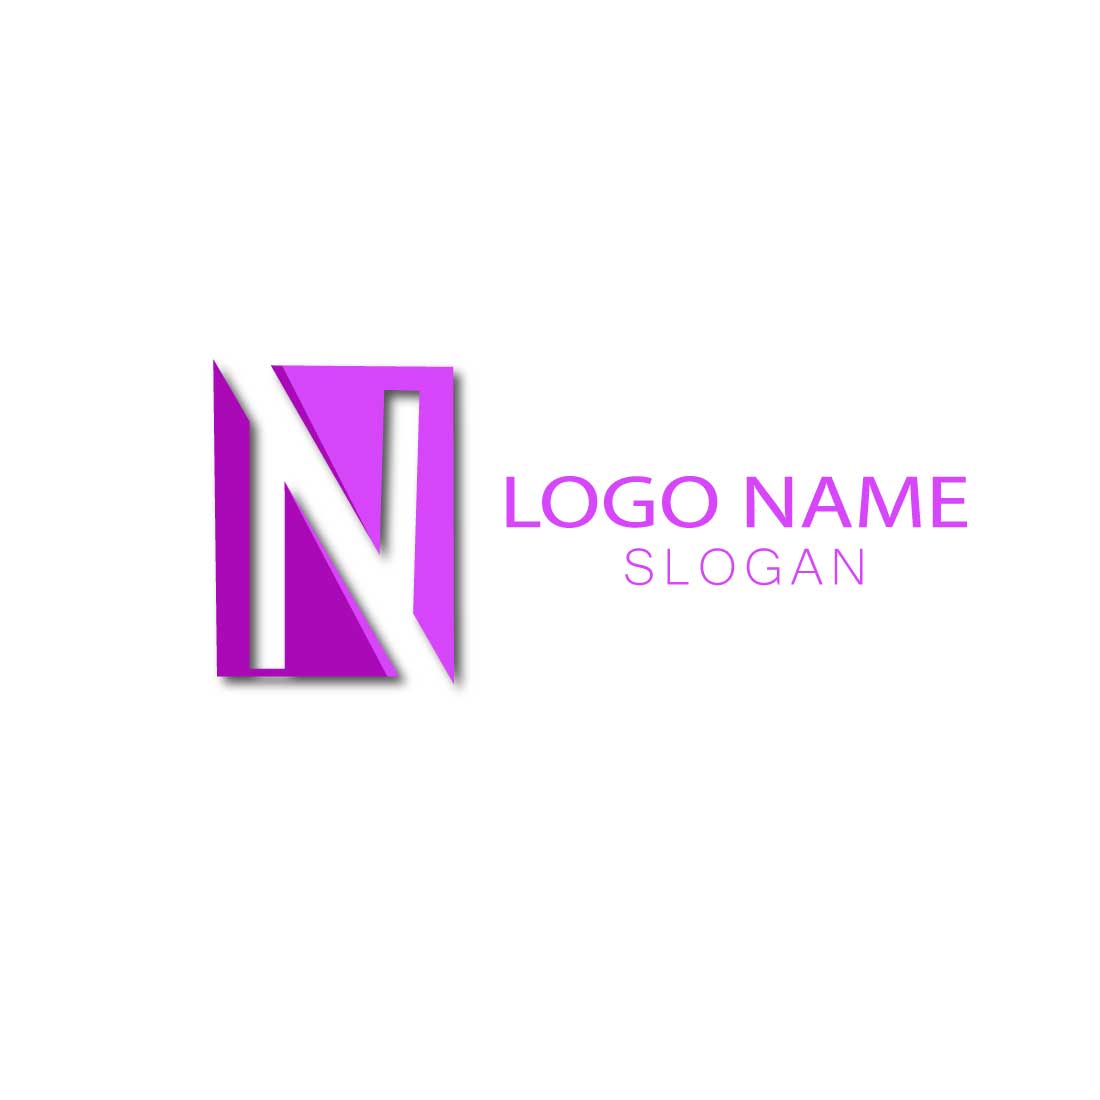 N letter logo and Negative Space Logo cover image.